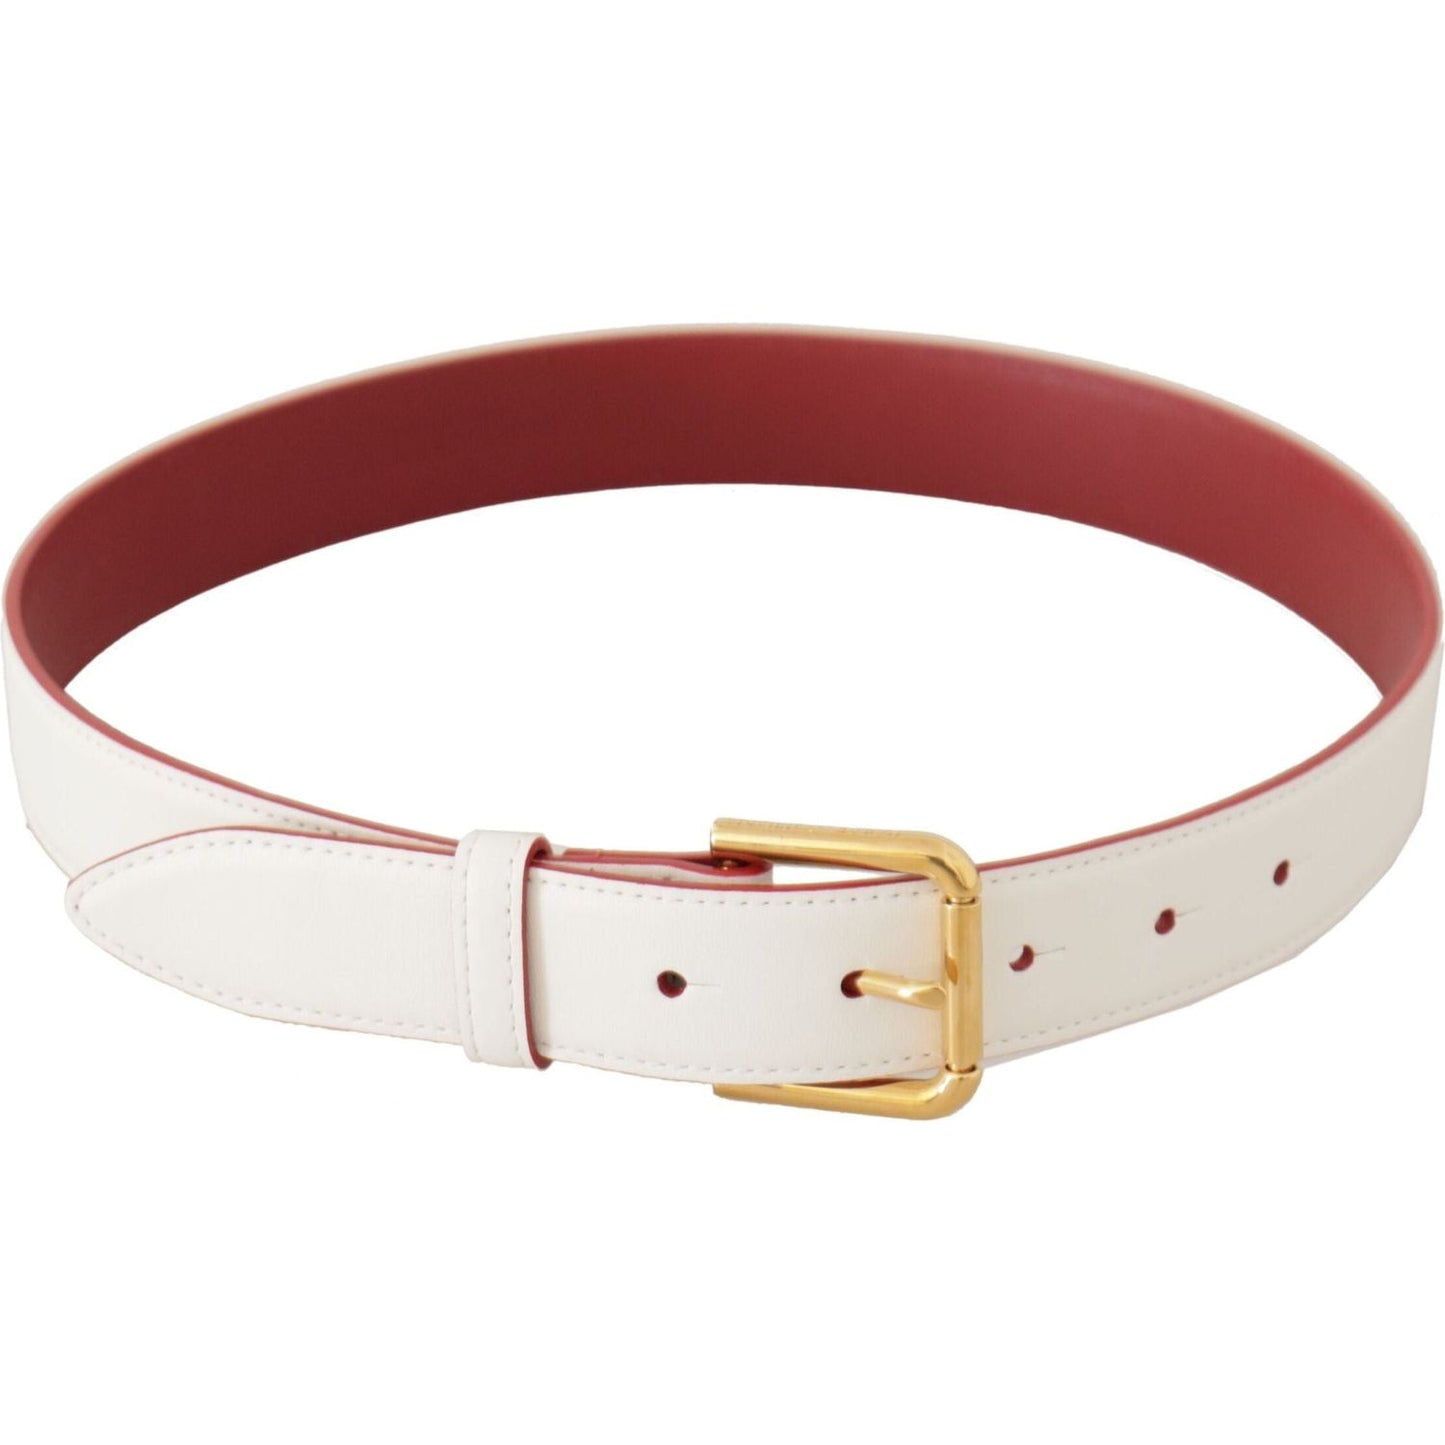 Dolce & Gabbana Elegant White Leather Belt with Engraved Buckle white-calf-leather-two-toned-gold-metal-buckle-belt IMG_0413-1-scaled-0a3528b2-afb.jpg